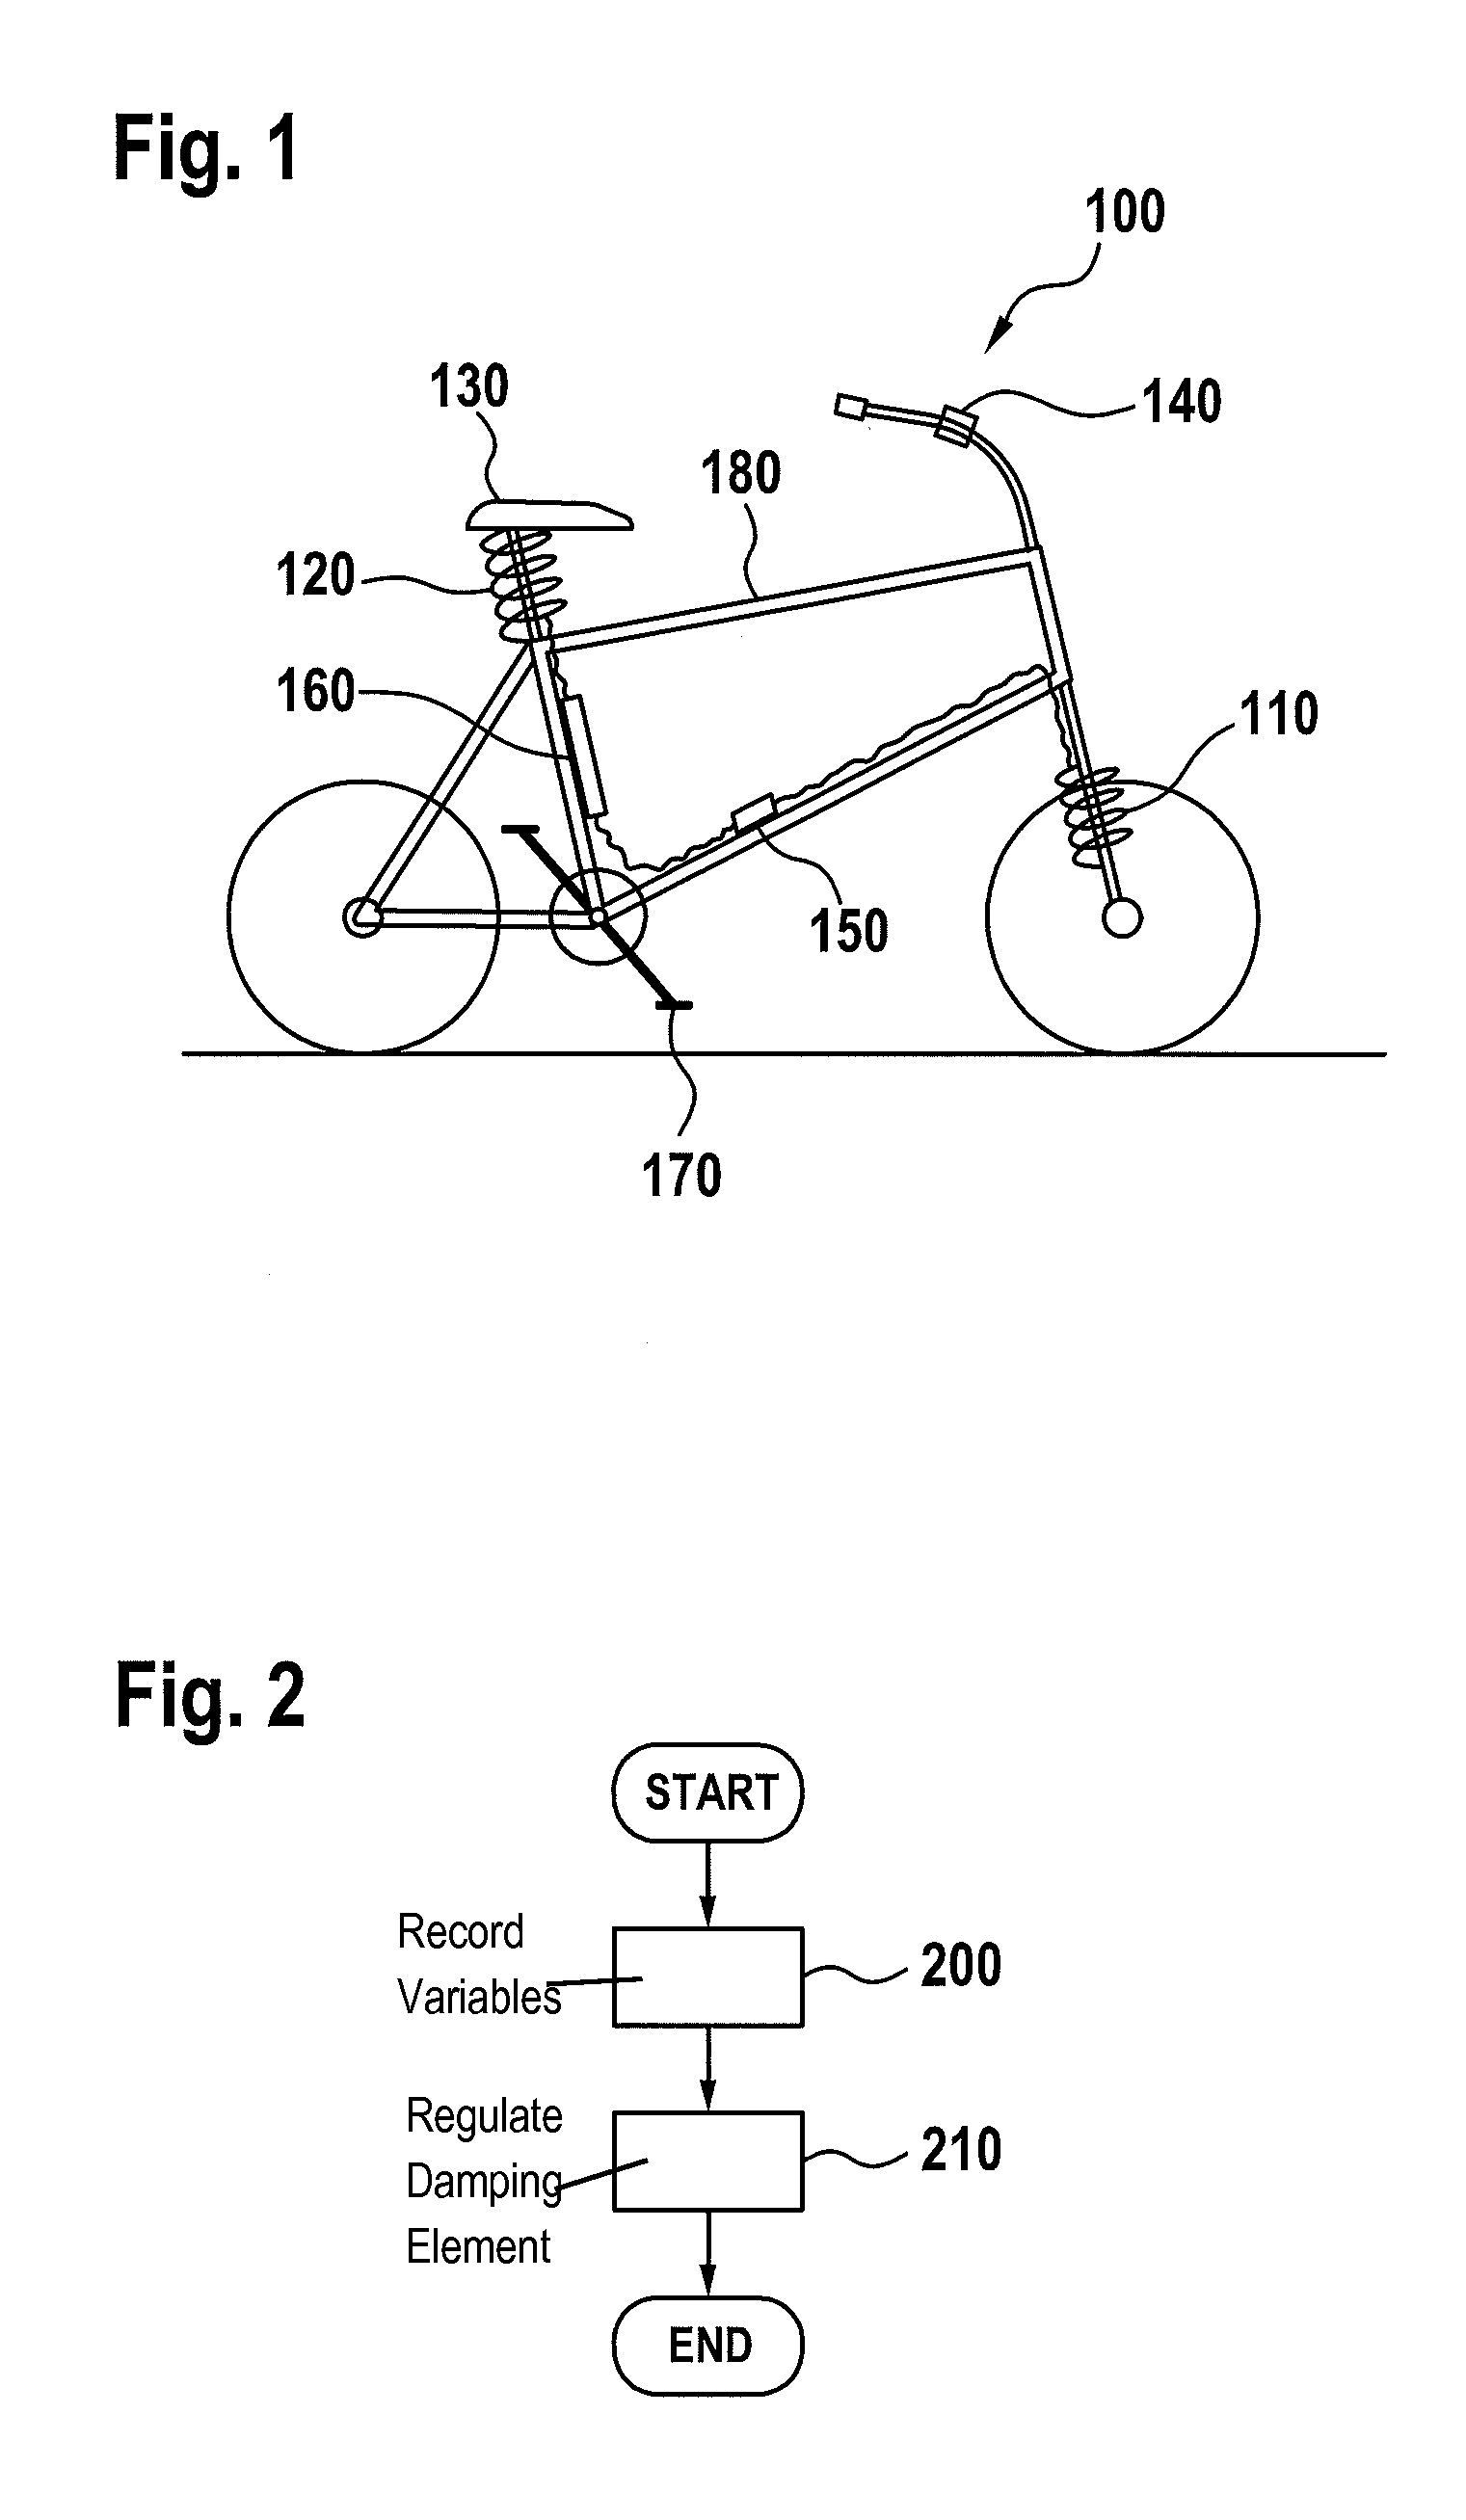 Method and device for controlling the damping of a vehicle that is able to be propelled by the driver